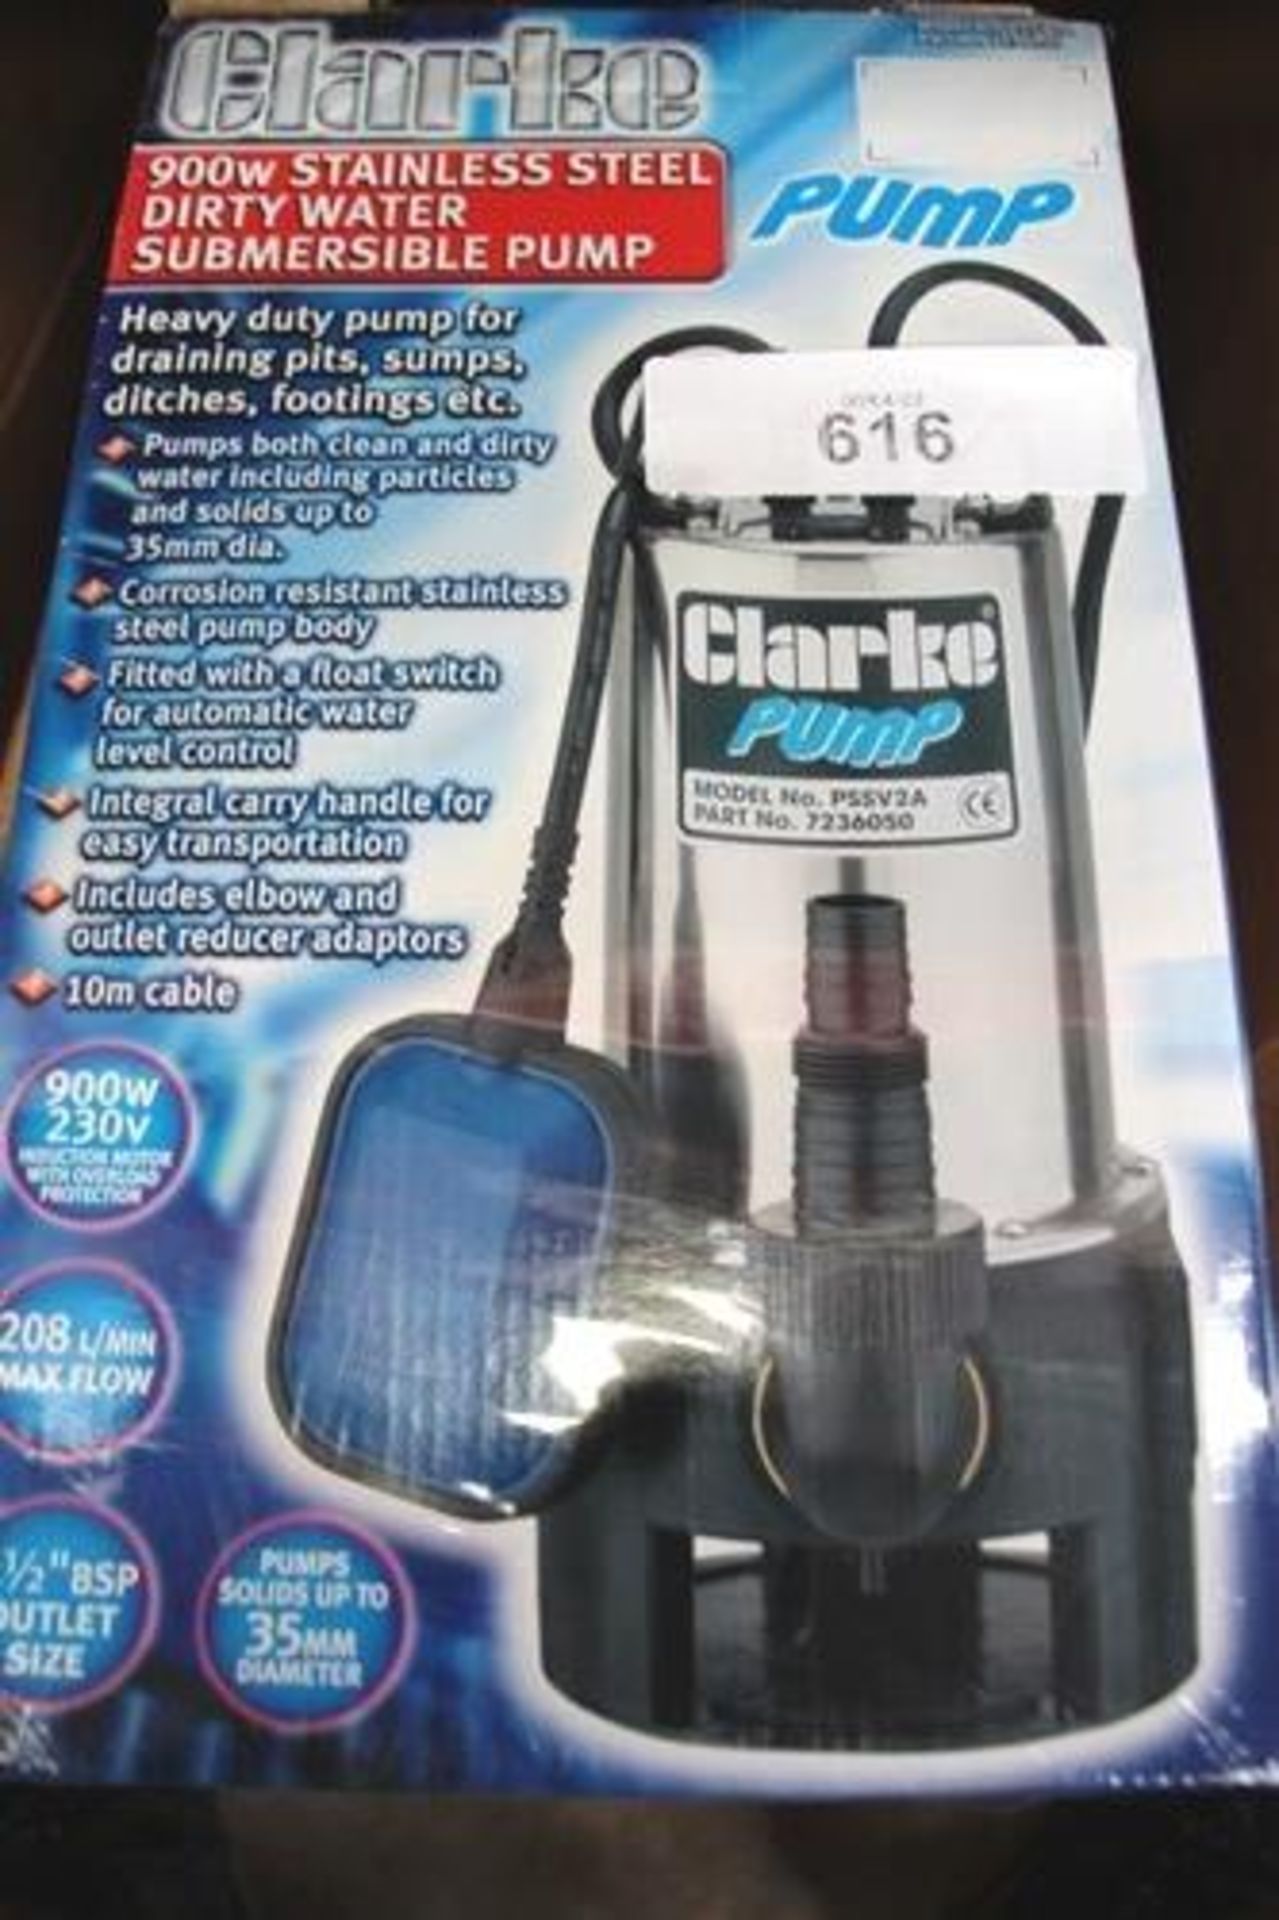 4 x Clarke 900W stainless steel submersible dirty water pumps - New (GS35floor) - Image 2 of 2